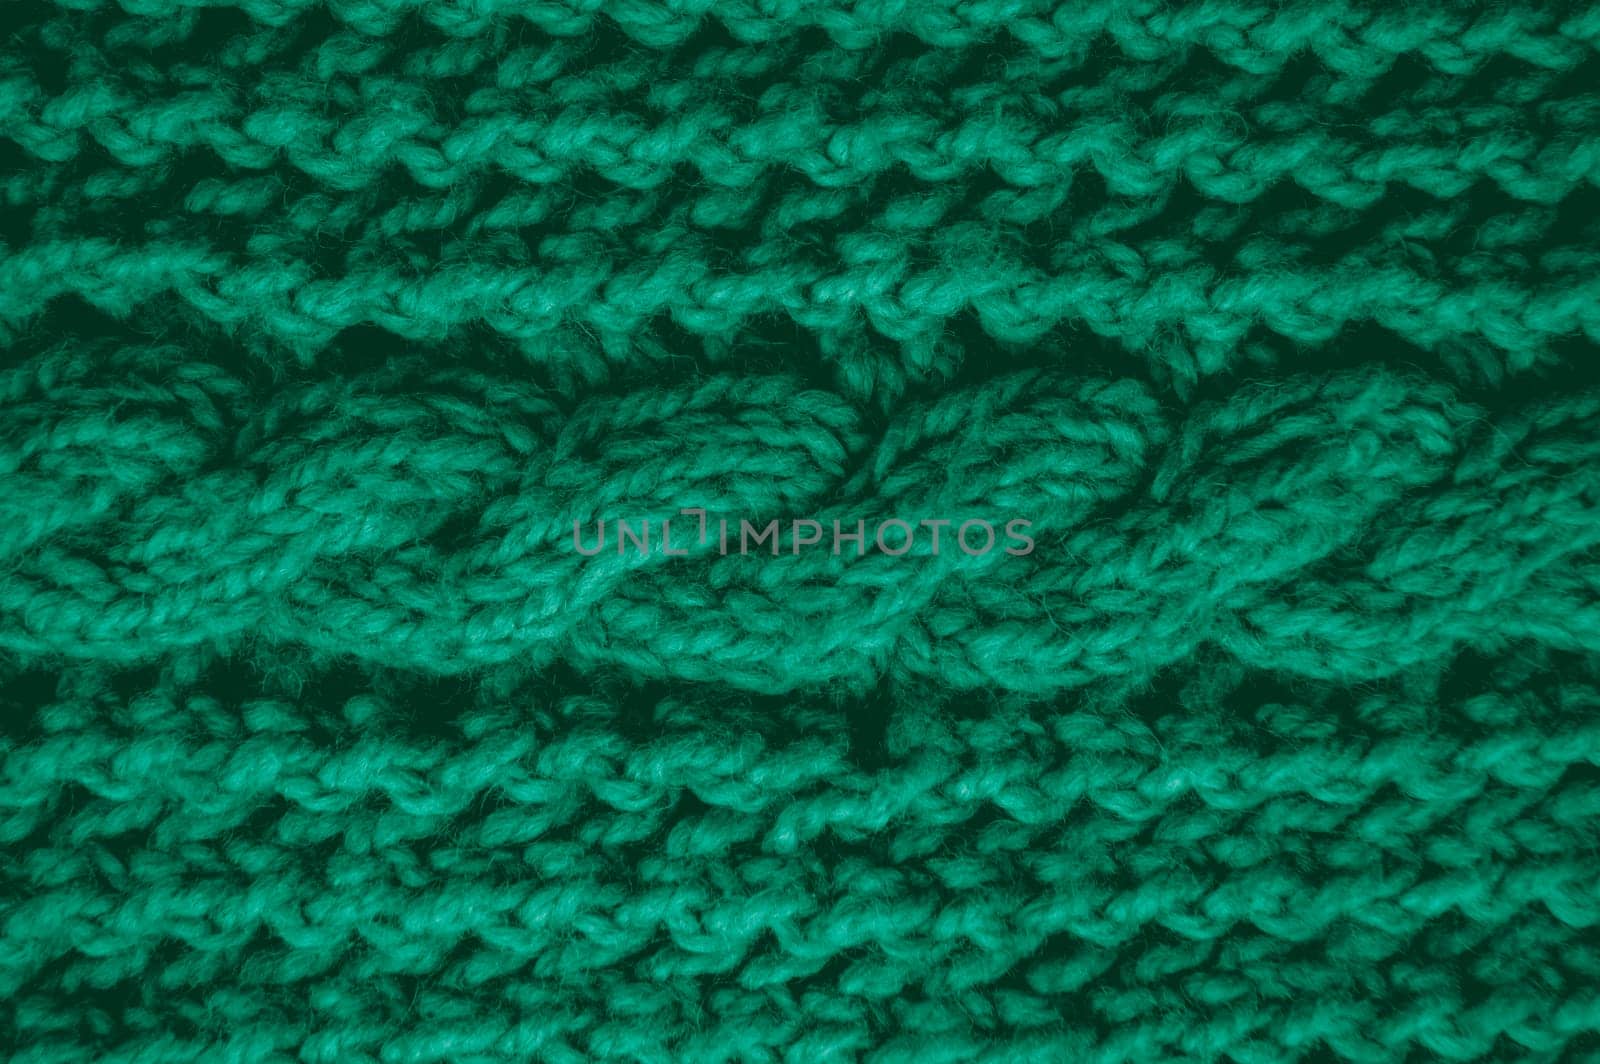 Pullover Texture. Abstract Woolen Background. Linen Jacquard Holiday Design. Structure Pullover Texture. Soft Thread. Nordic Warm Yarn. Macro Blanket Cashmere. Knitwear Texture.